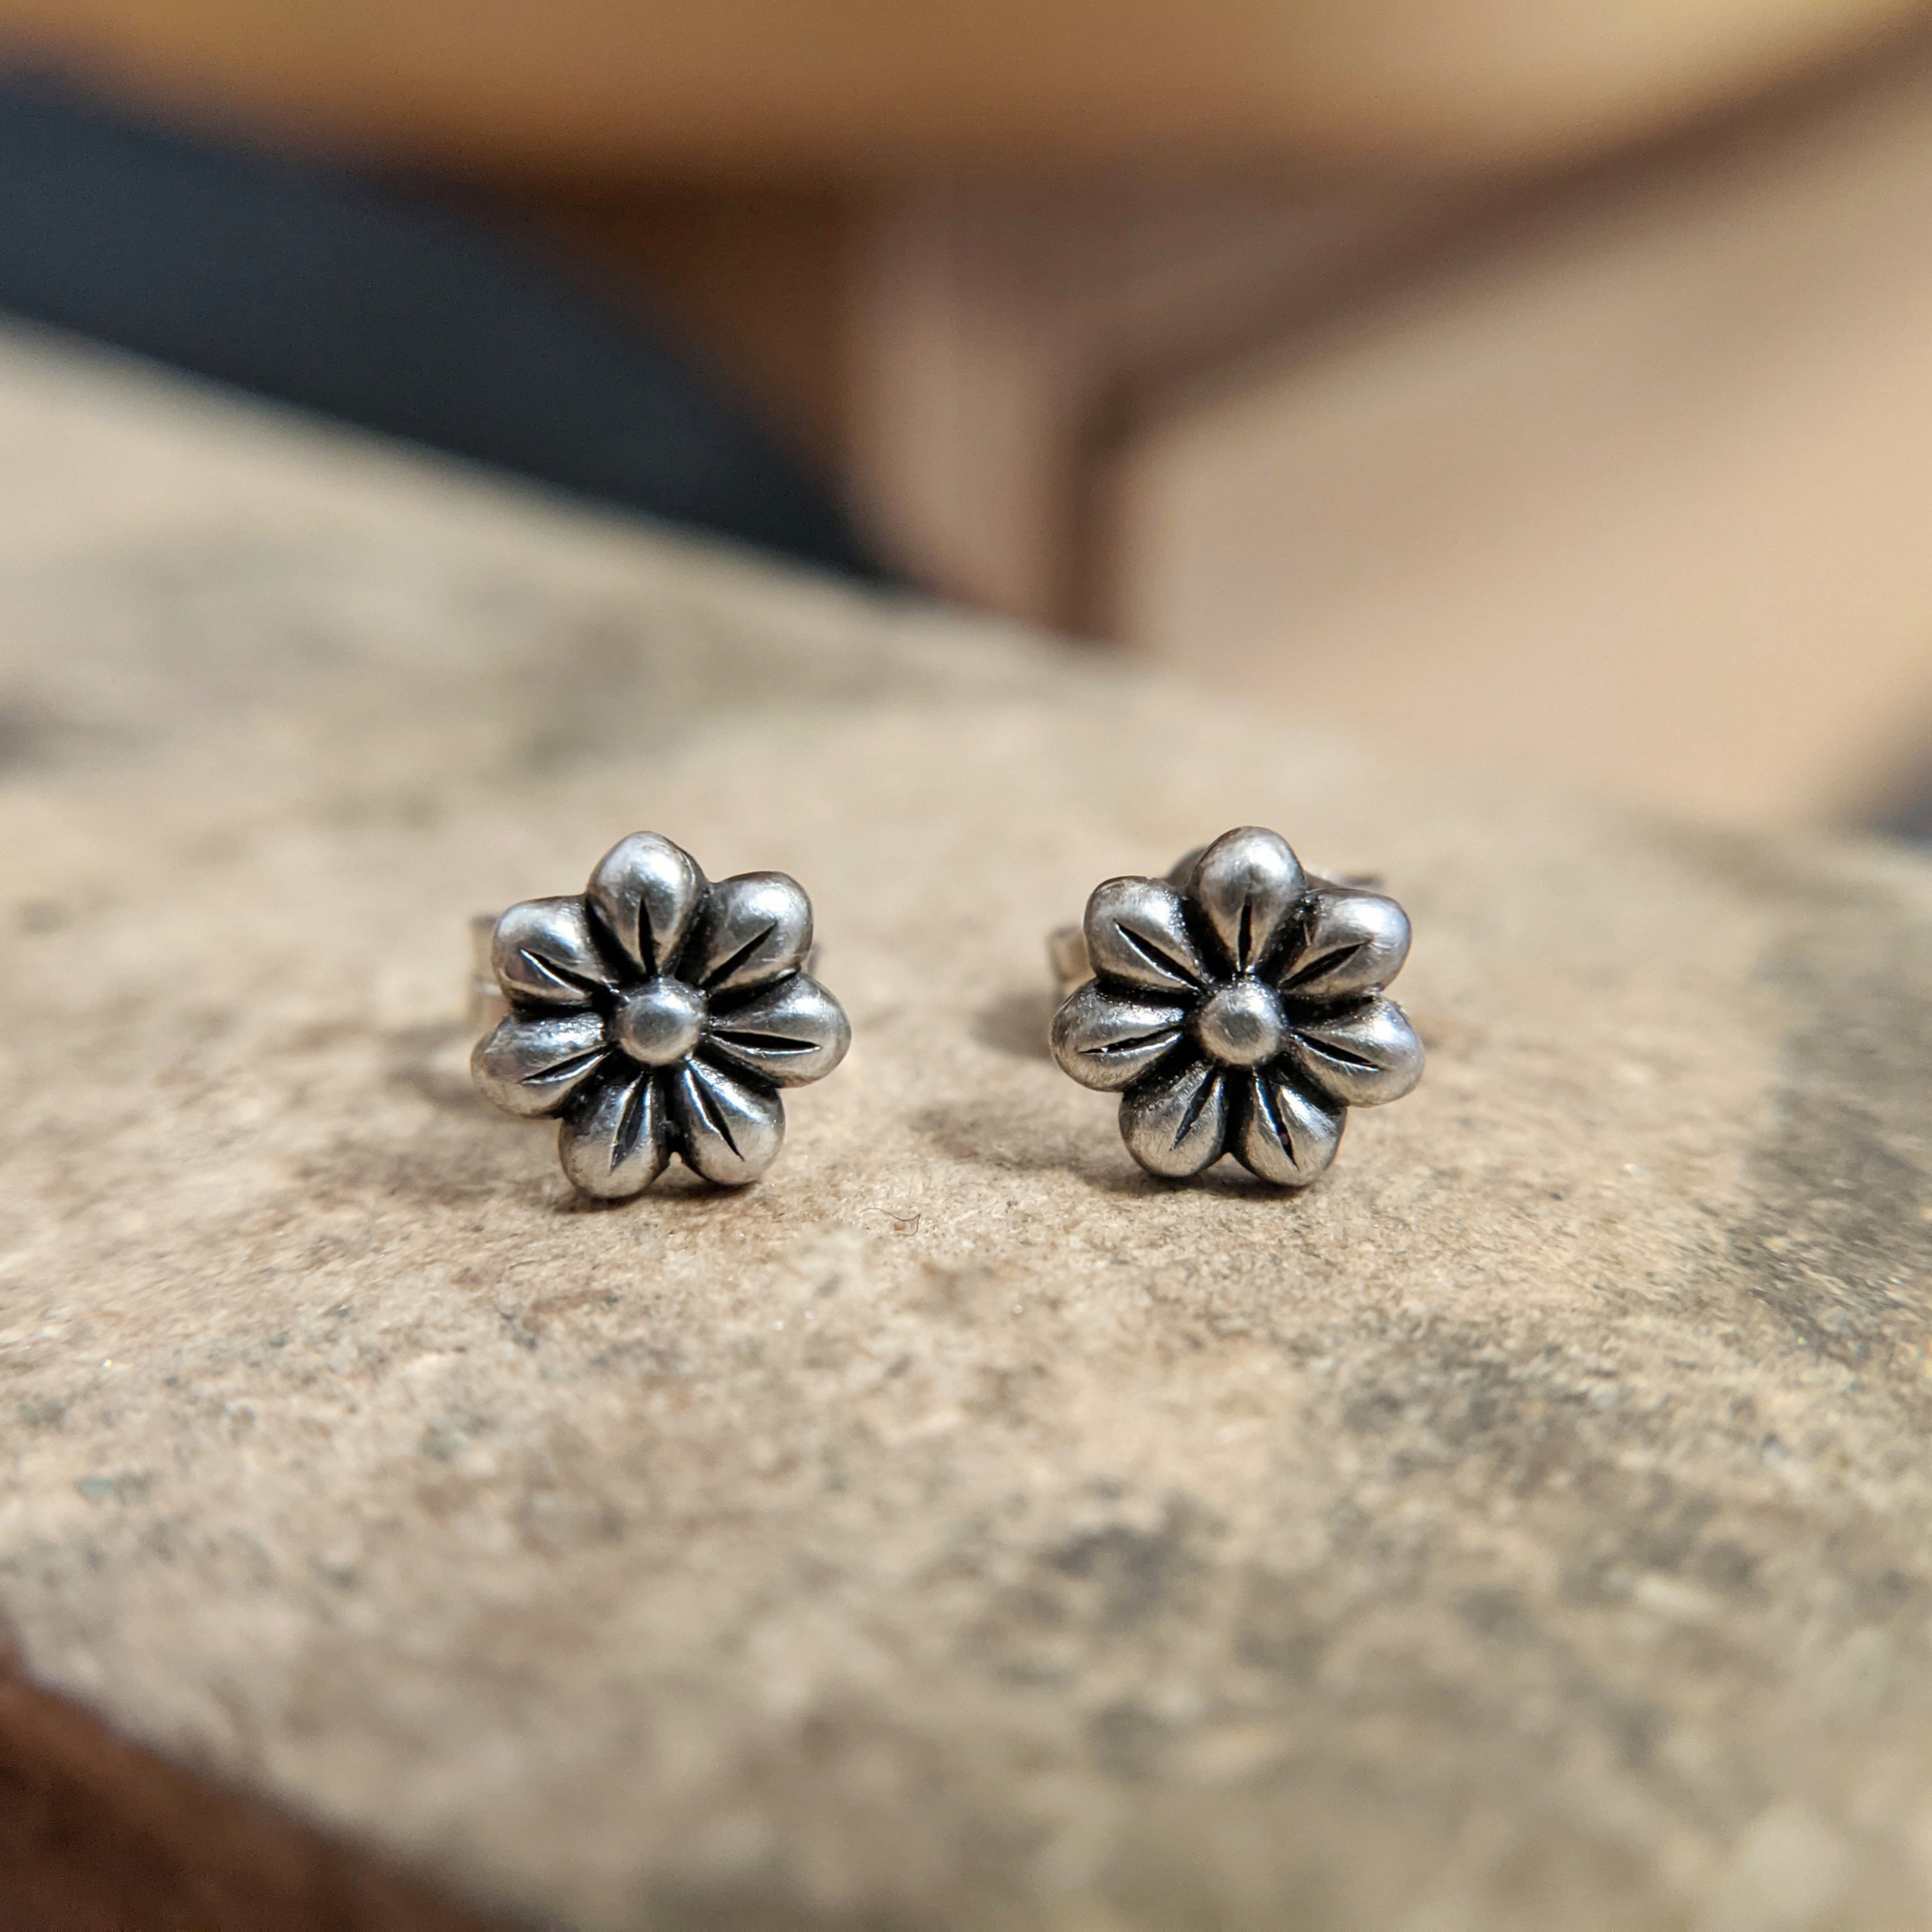 Flower Stud Earrings sterling silver 6mm photographed on a white background